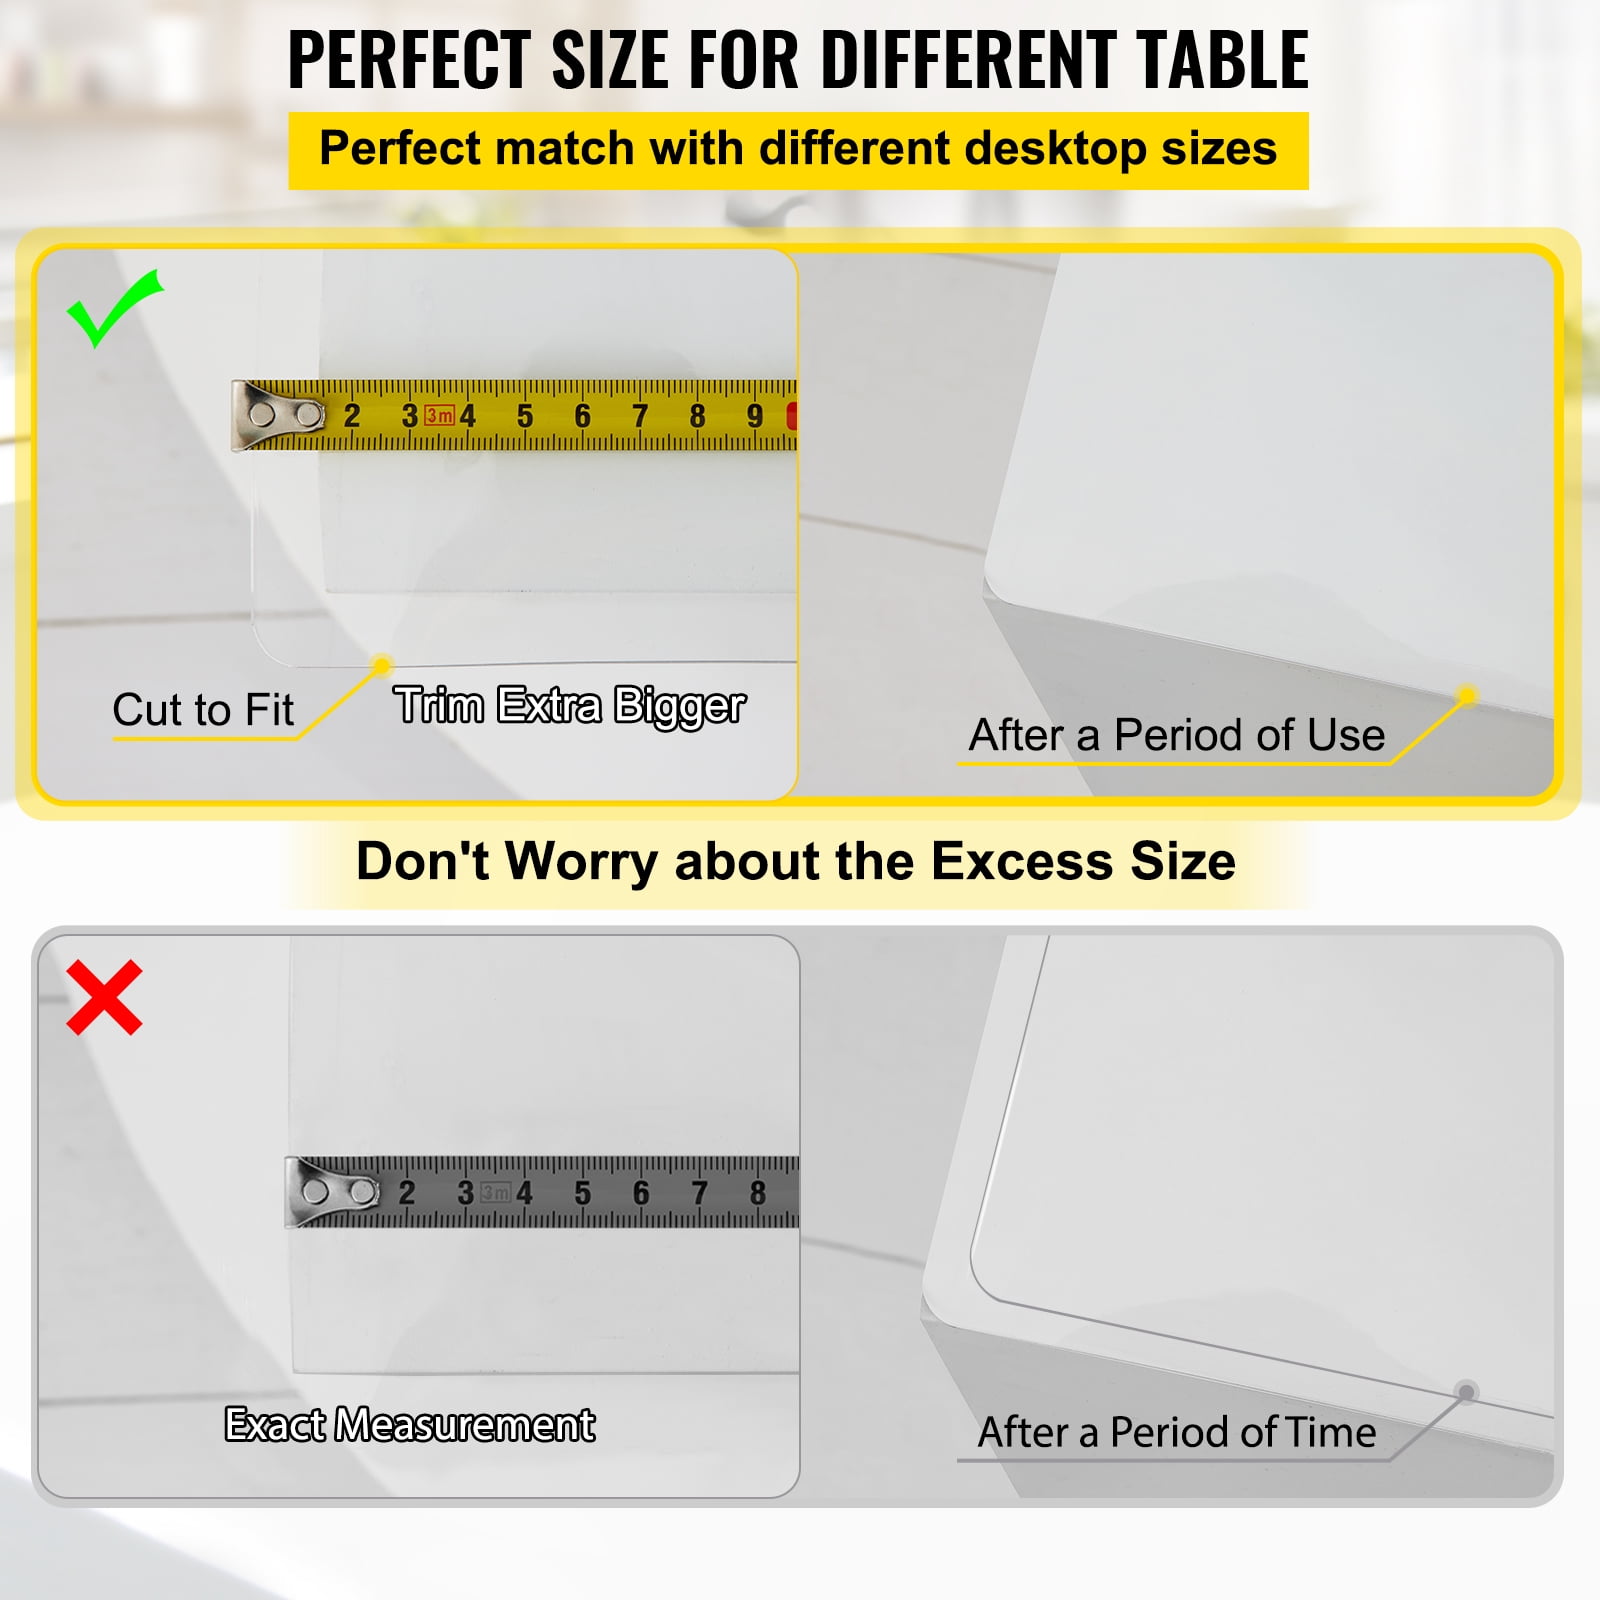 VEVOR Clear Table Cover Protector, 36x36/916 x 916 mm Table Cover, 1.5 mm  Thick PVC Plastic Tablecloth, Waterproof Desktop Protector for Writing Desk,  Coffee Table, Dining Room Table